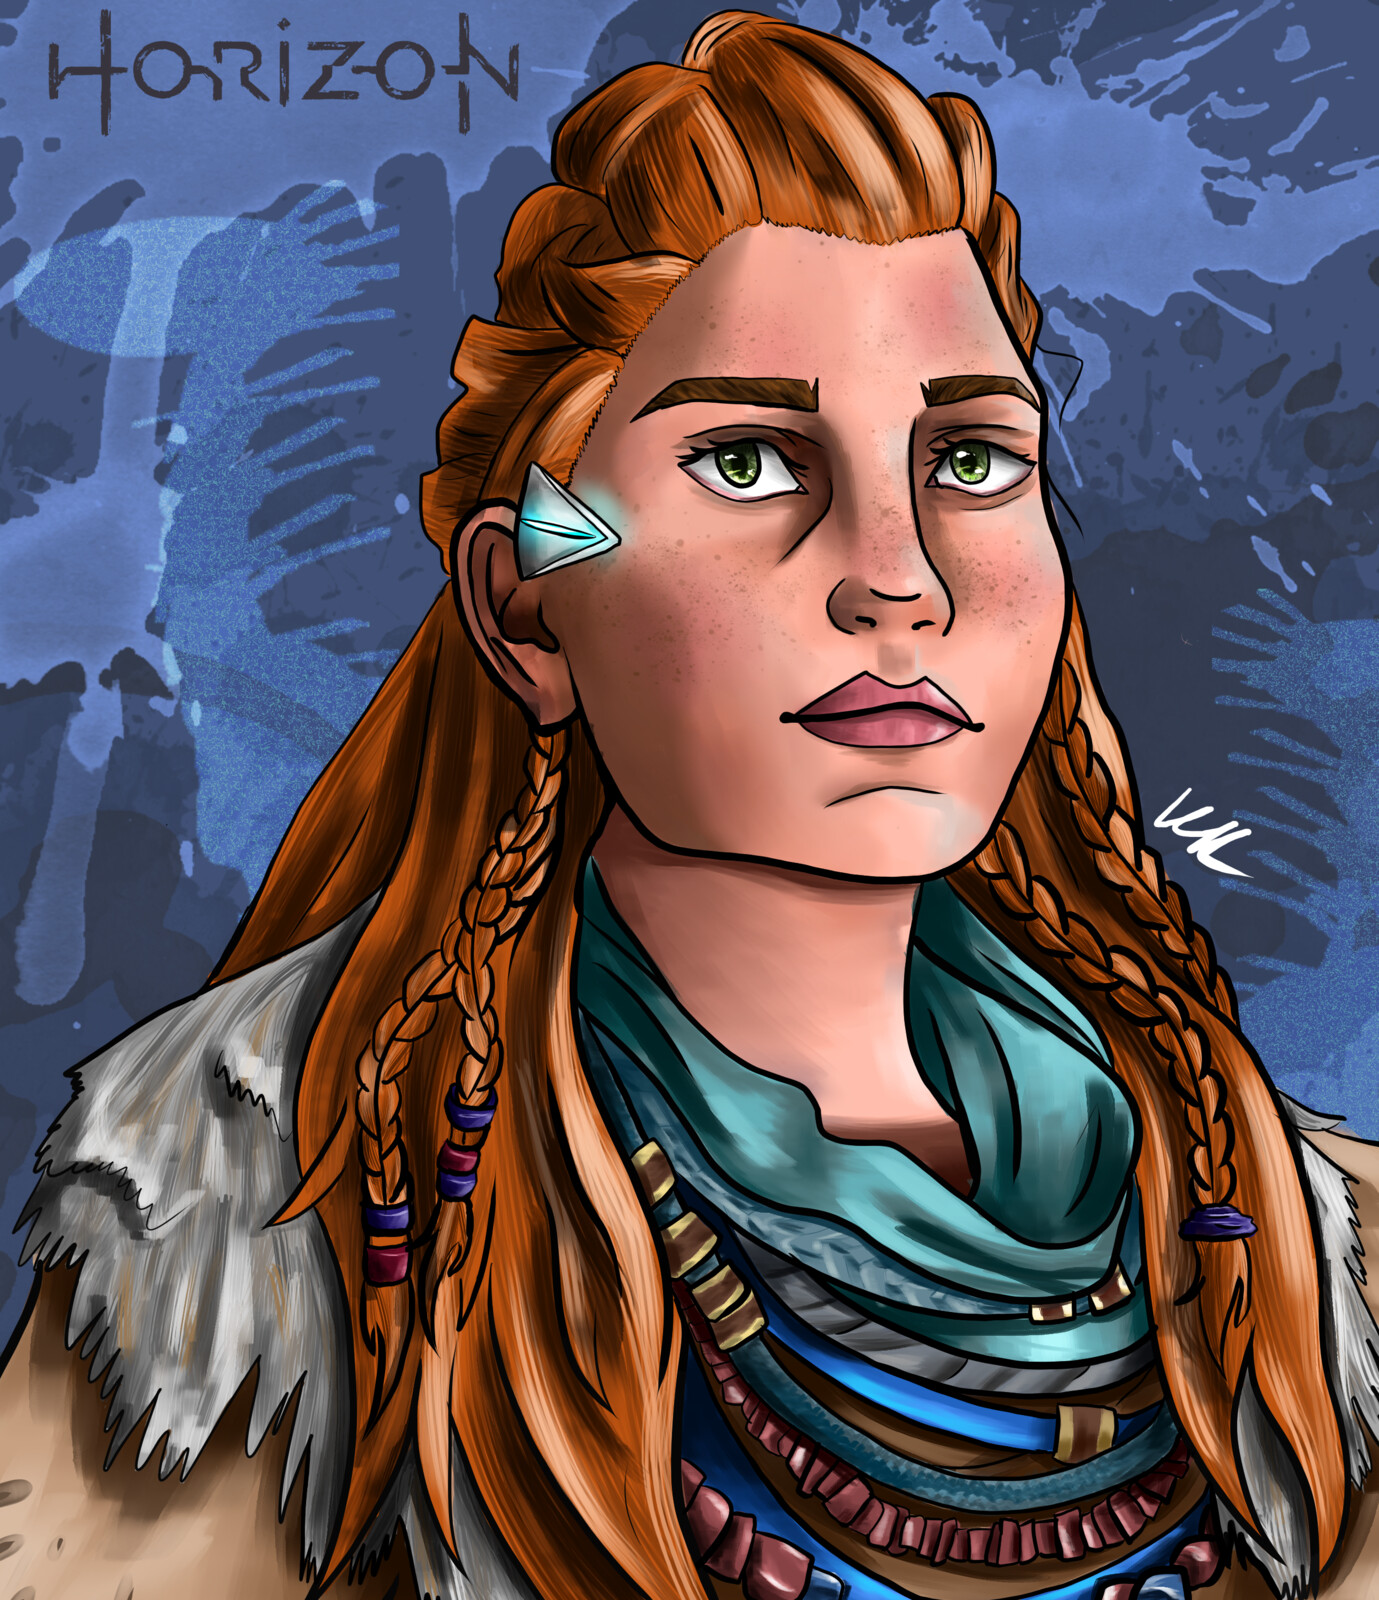 Aloy from Horizon Zero Dawn and Forbidden West


Just love these Games